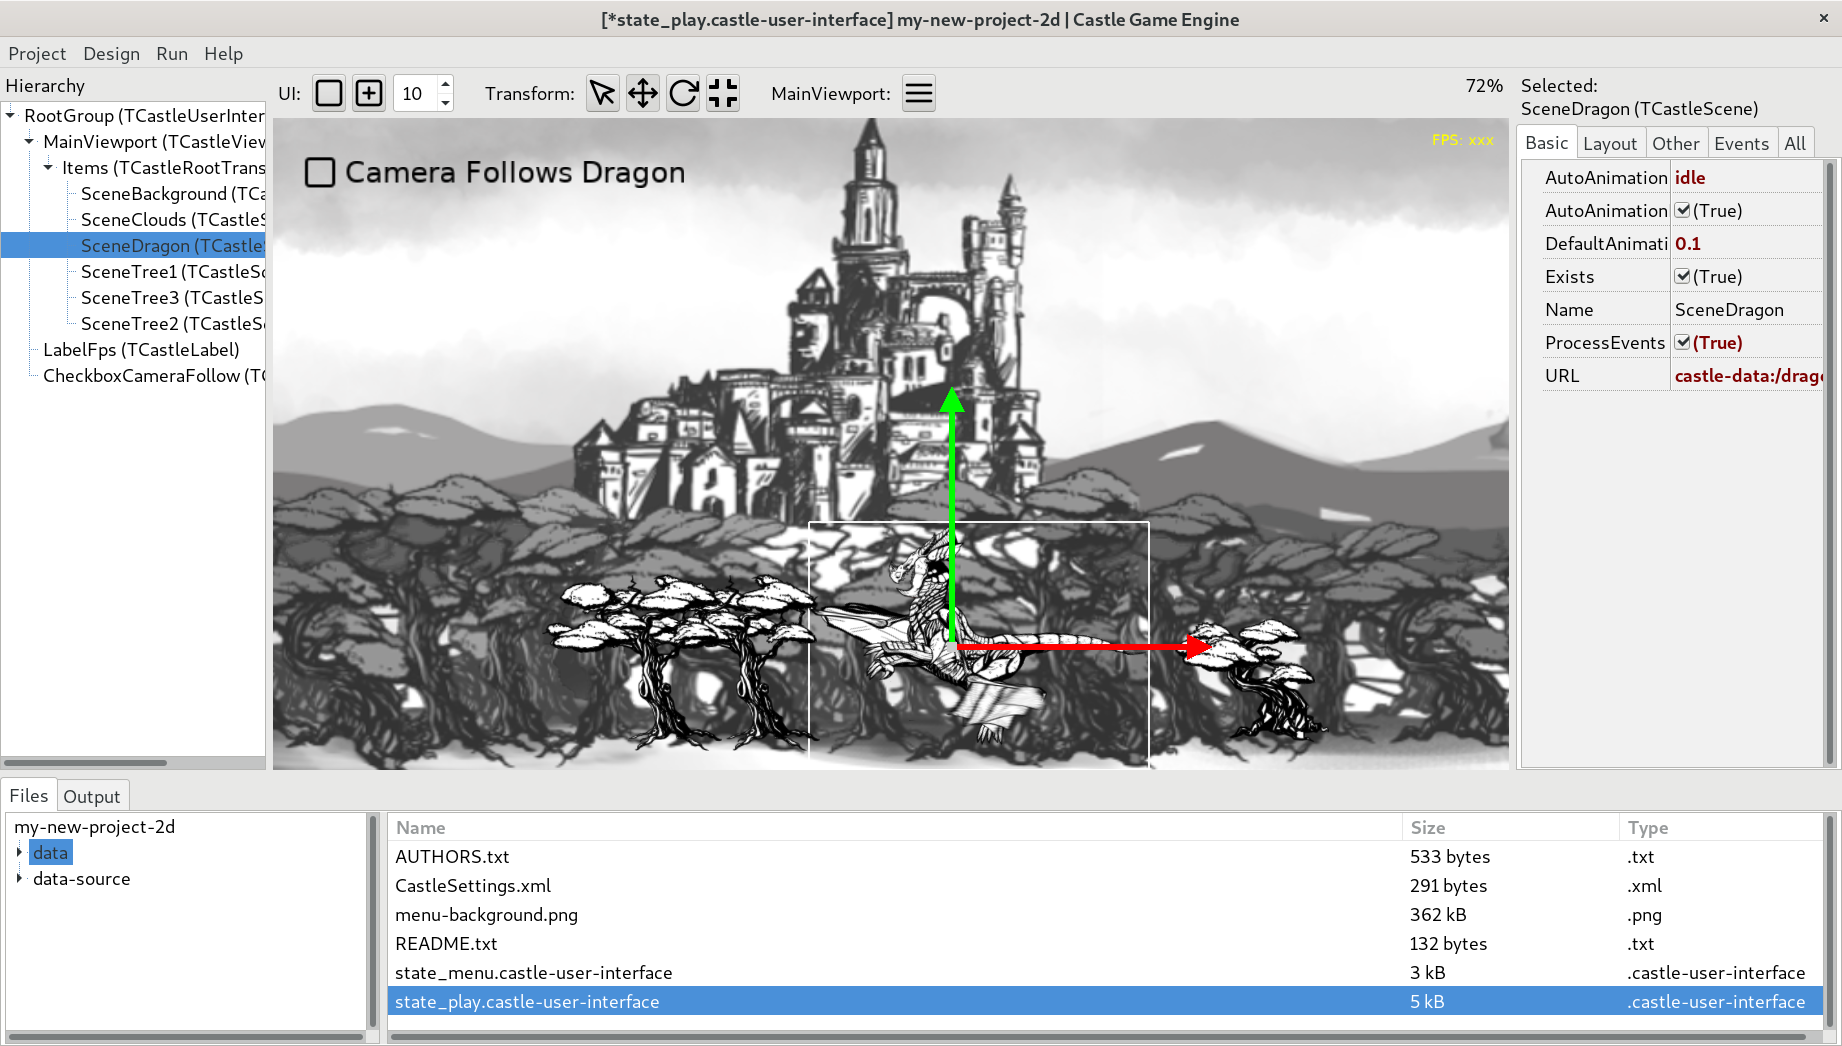 Everything You Need to Know About Castle Game Engine